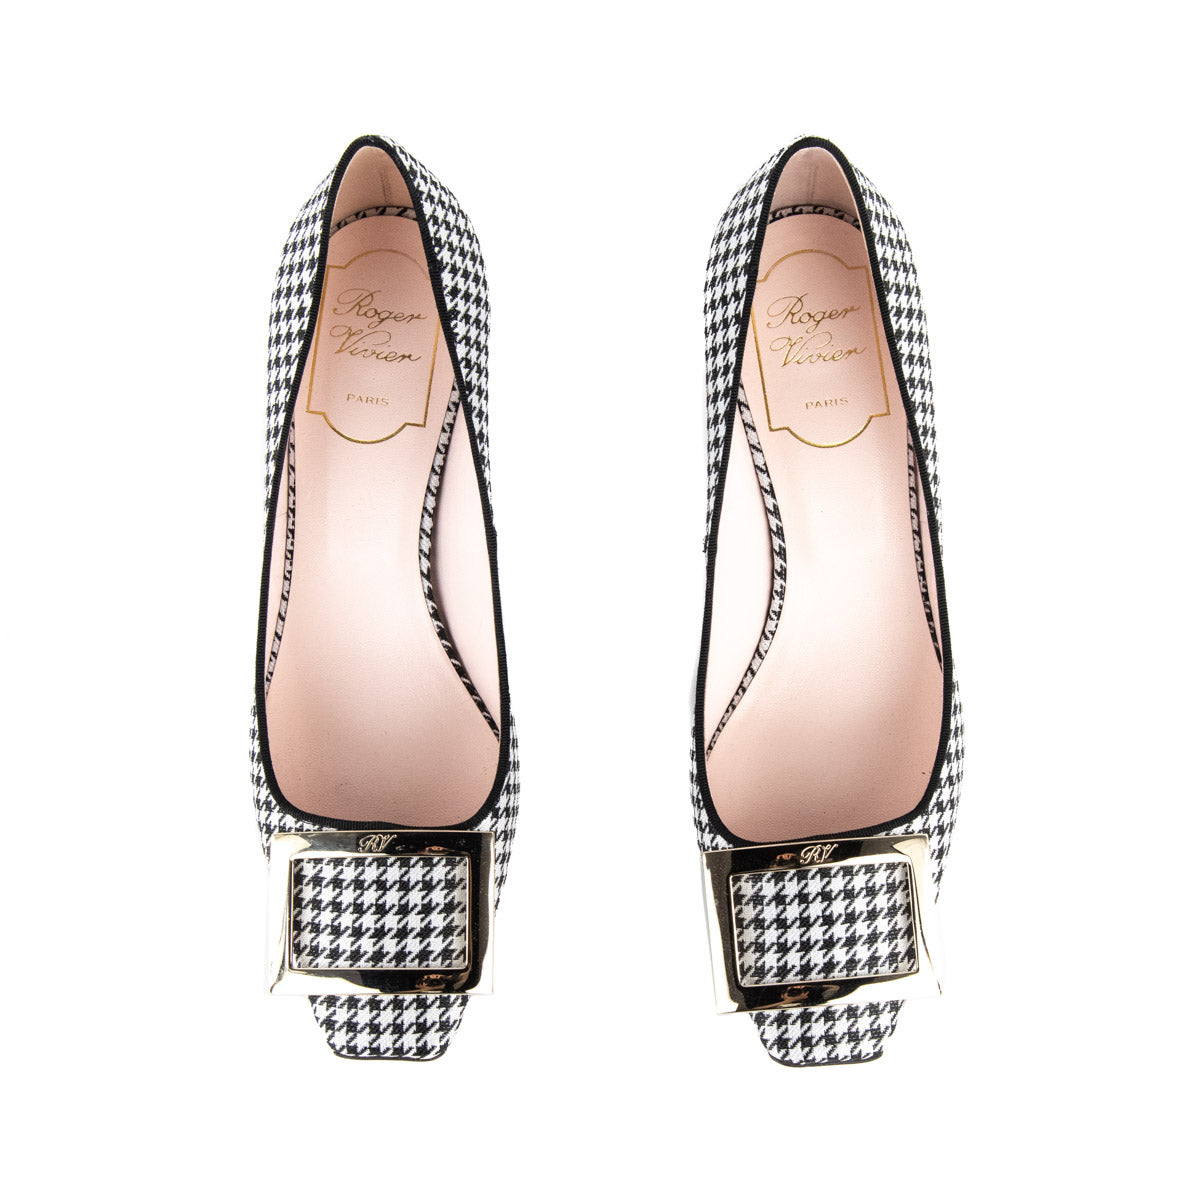 Roger Vivier Black & White Houndstooth Printed Buckle Pumps Size US 6.5 | EU 36.5 - Love that Bag etc - Preowned Authentic Designer Handbags & Preloved Fashions